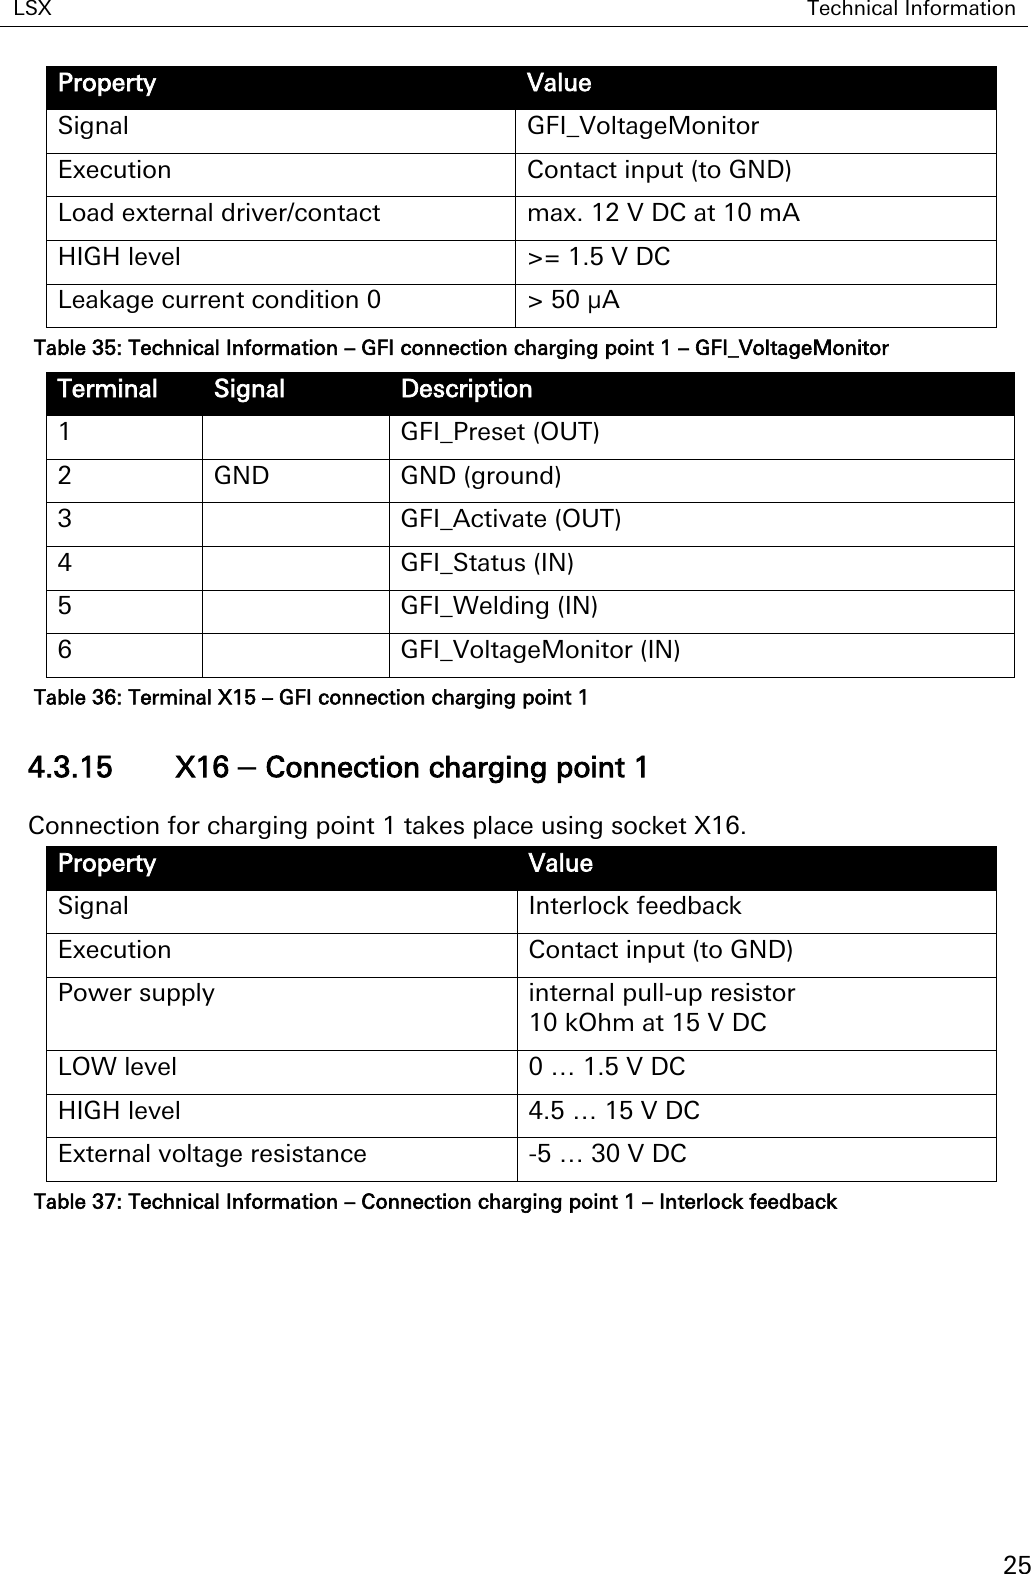 LSX Technical Information   25 Property Value Signal GFI_VoltageMonitor Execution Contact input (to GND) Load external driver/contact max. 12 V DC at 10 mA HIGH level &gt;= 1.5 V DC Leakage current condition 0 &gt; 50 µA Table 35: Technical Information – GFI connection charging point 1 – GFI_VoltageMonitor Terminal Signal Description 1  GFI_Preset (OUT) 2 GND GND (ground) 3  GFI_Activate (OUT) 4  GFI_Status (IN) 5  GFI_Welding (IN) 6  GFI_VoltageMonitor (IN) Table 36: Terminal X15 – GFI connection charging point 1 4.3.15 X16 – Connection charging point 1 Connection for charging point 1 takes place using socket X16. Property Value Signal Interlock feedback Execution Contact input (to GND) Power supply internal pull-up resistor  10 kOhm at 15 V DC LOW level 0 … 1.5 V DC HIGH level 4.5 … 15 V DC External voltage resistance -5 … 30 V DC Table 37: Technical Information – Connection charging point 1 – Interlock feedback 